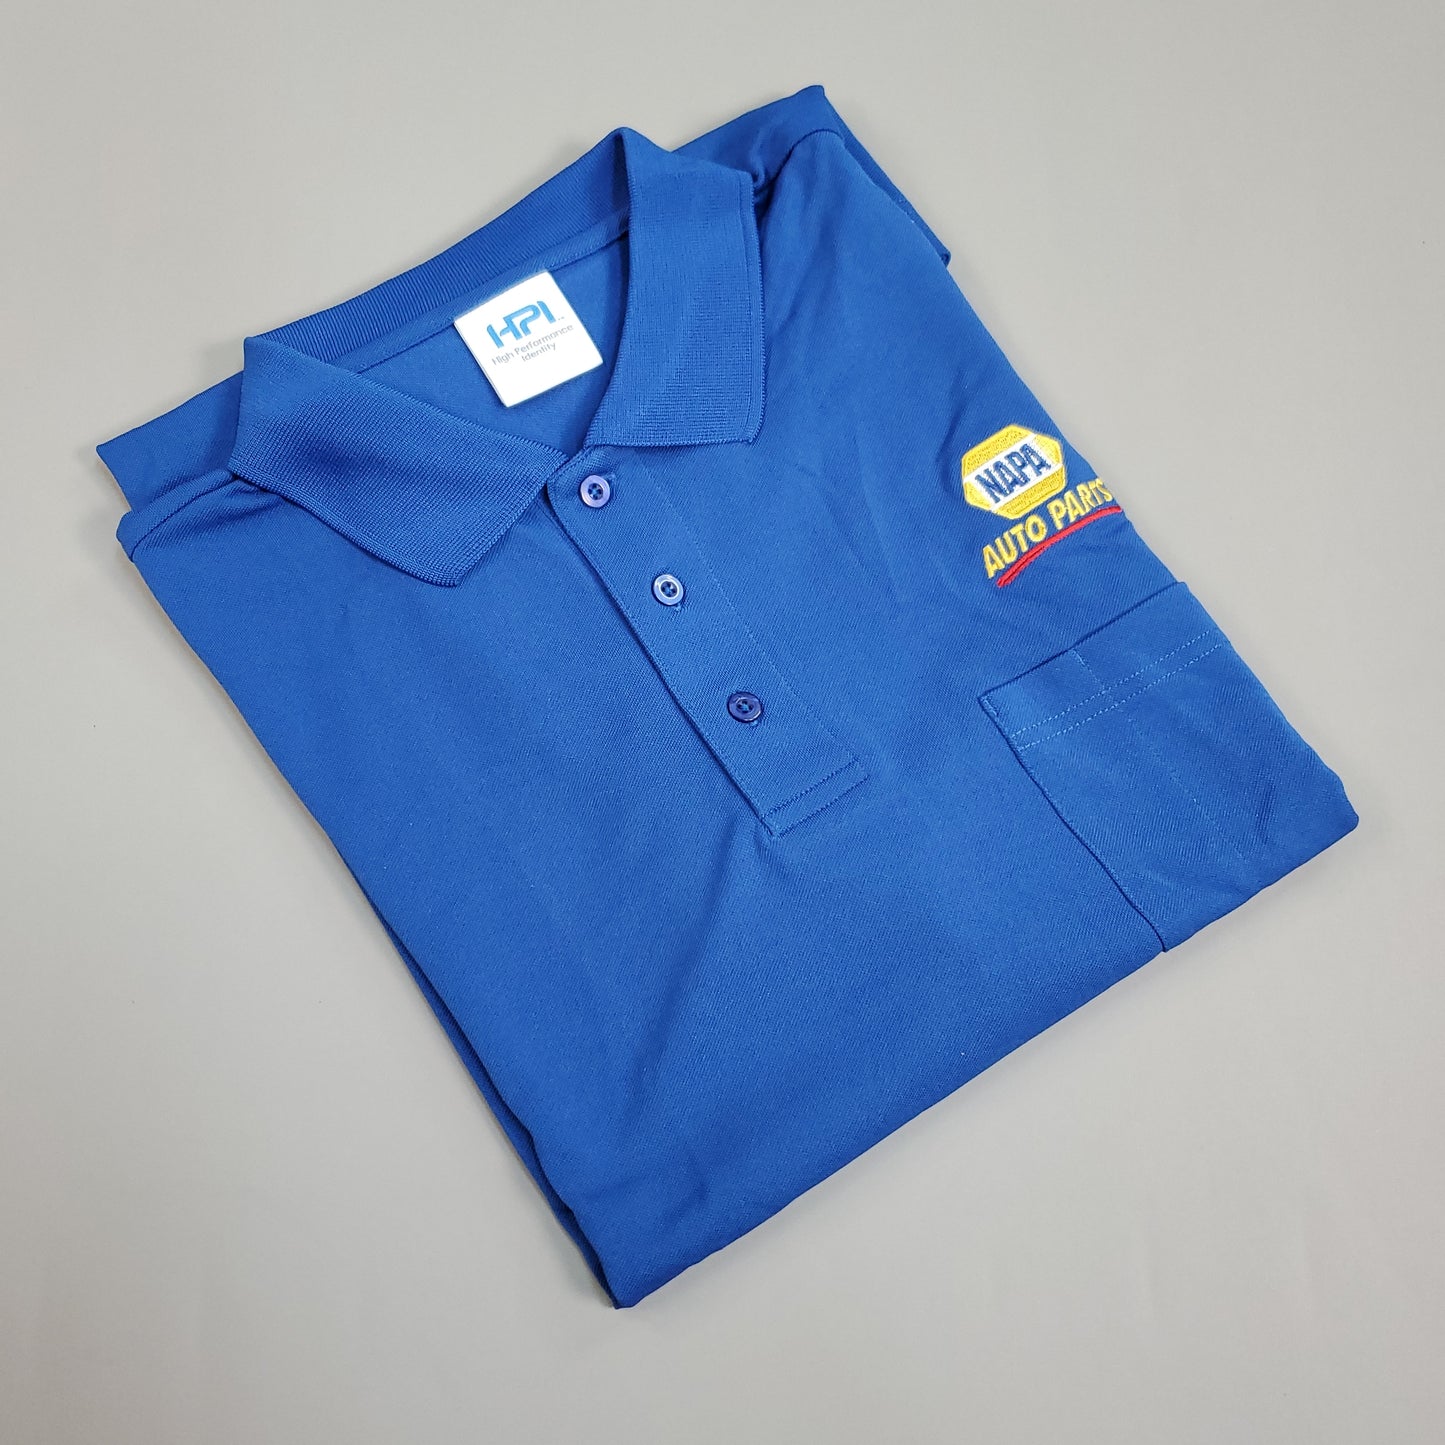 NAPA Auto Parts Employee Staff Uniform Polo SS Embroidered Shirt Unisex Sz L Blue (New Other)